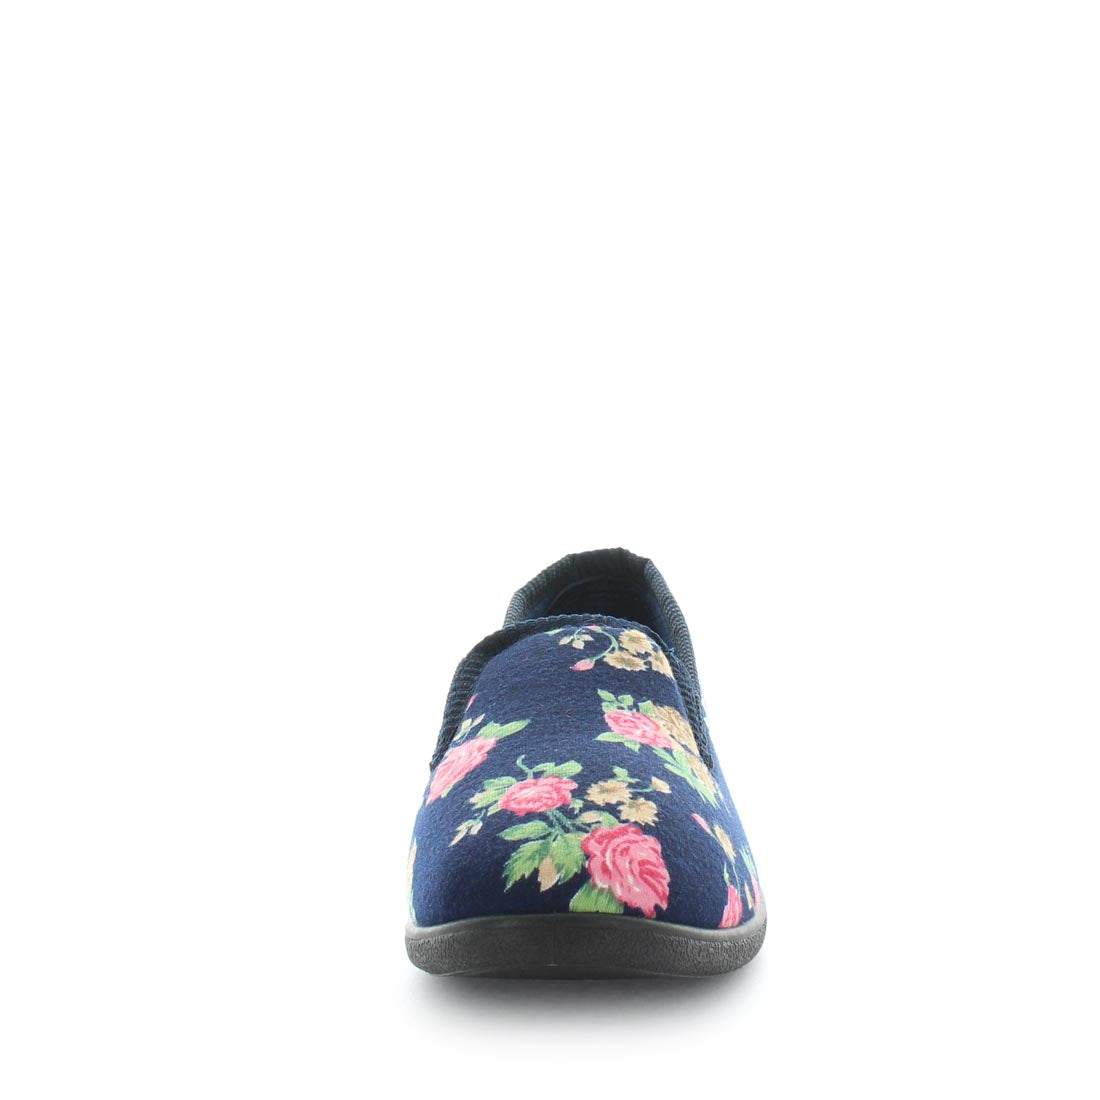 womens slippers - Navy Floral Erta slipper, by panda Slippers. A slip on style slipper with embossed velour twin gussets and a quilted satin lining and sock for a soft to the touch feel.